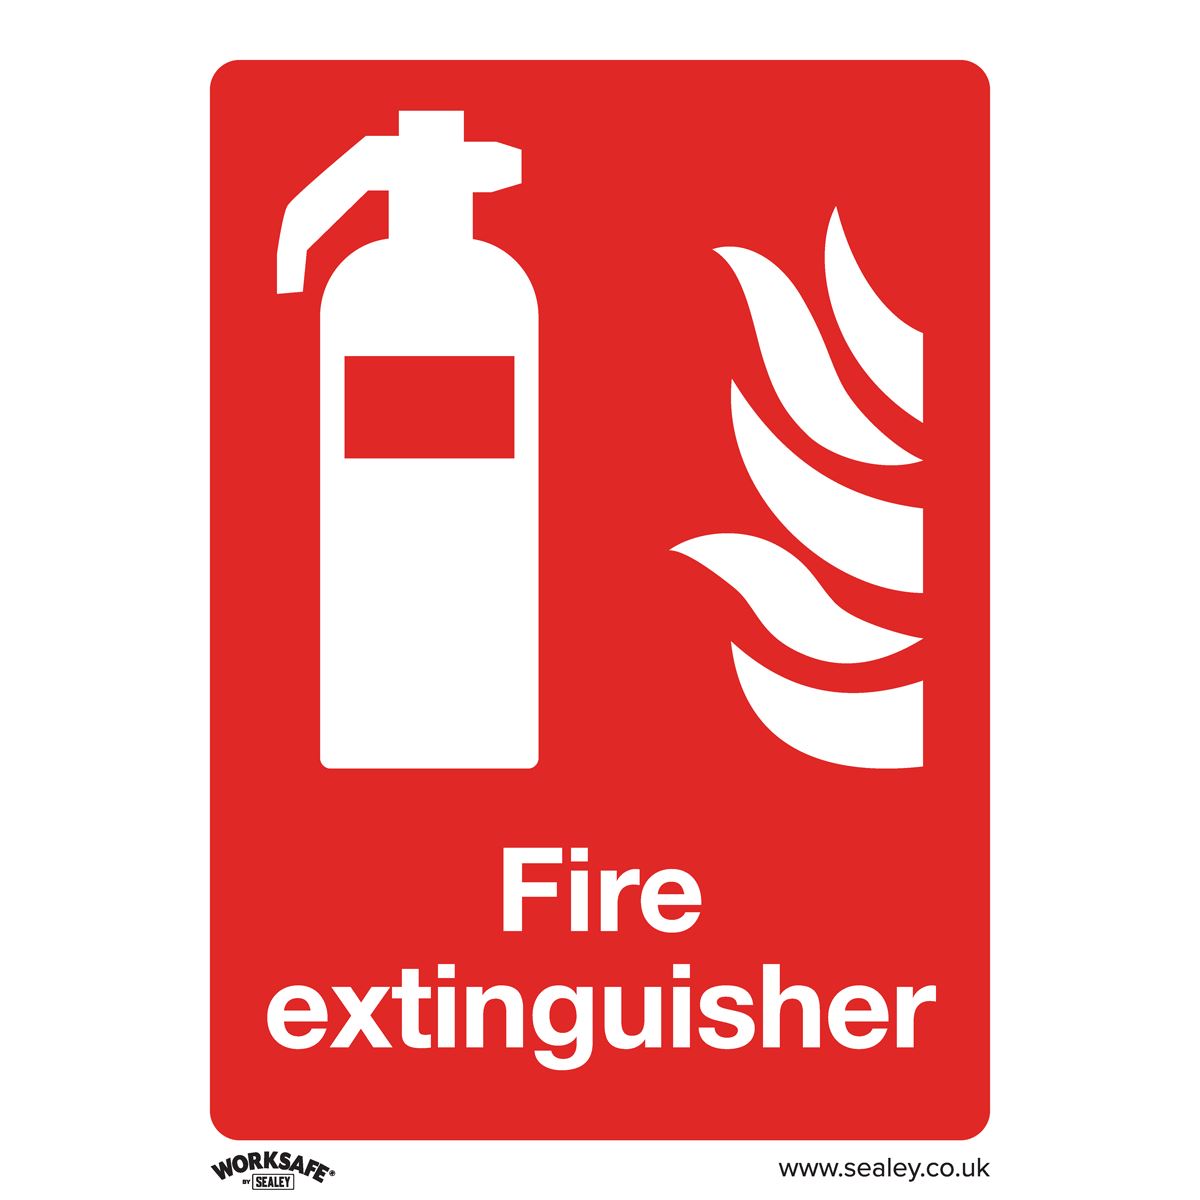 Worksafe by Sealey Information Safety Sign - Fire Extinguisher - Rigid Plastic